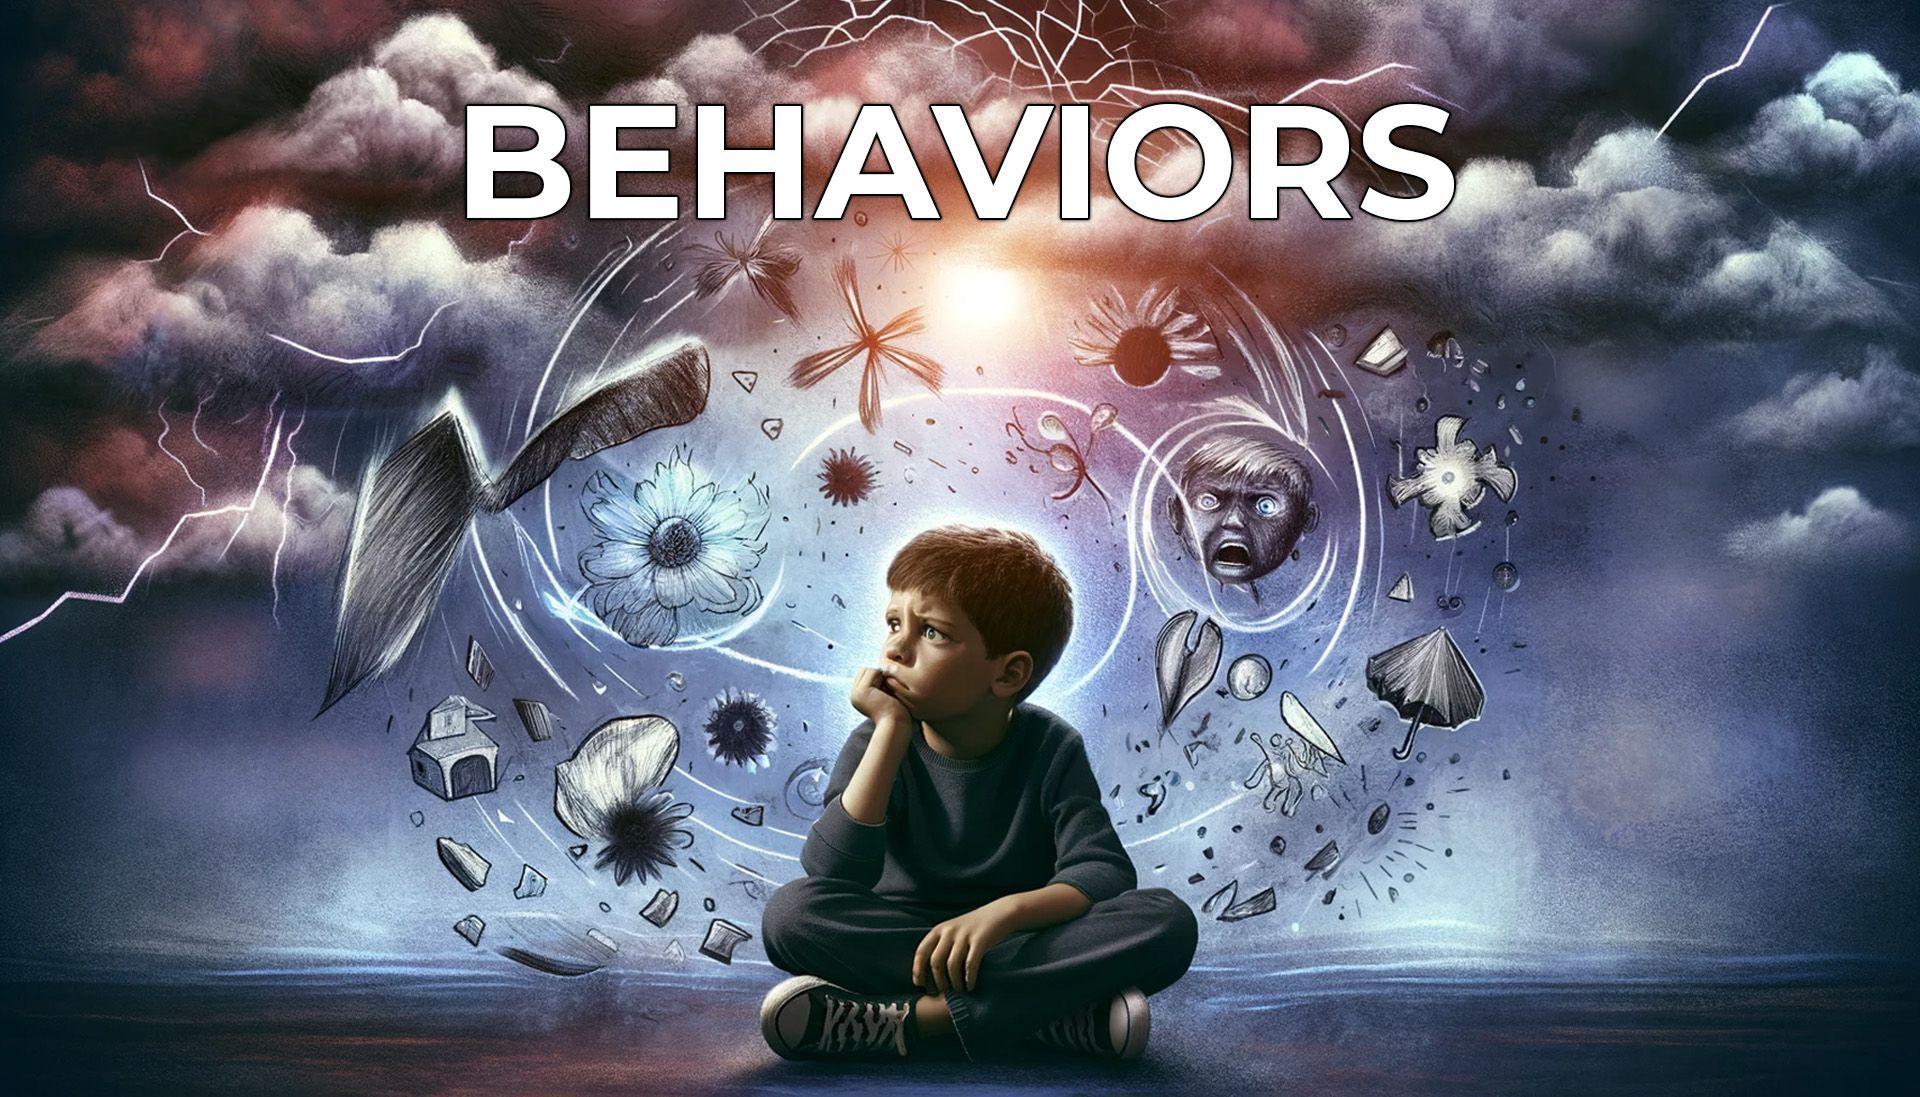 a poster for behaviors shows a boy surrounded by drawings